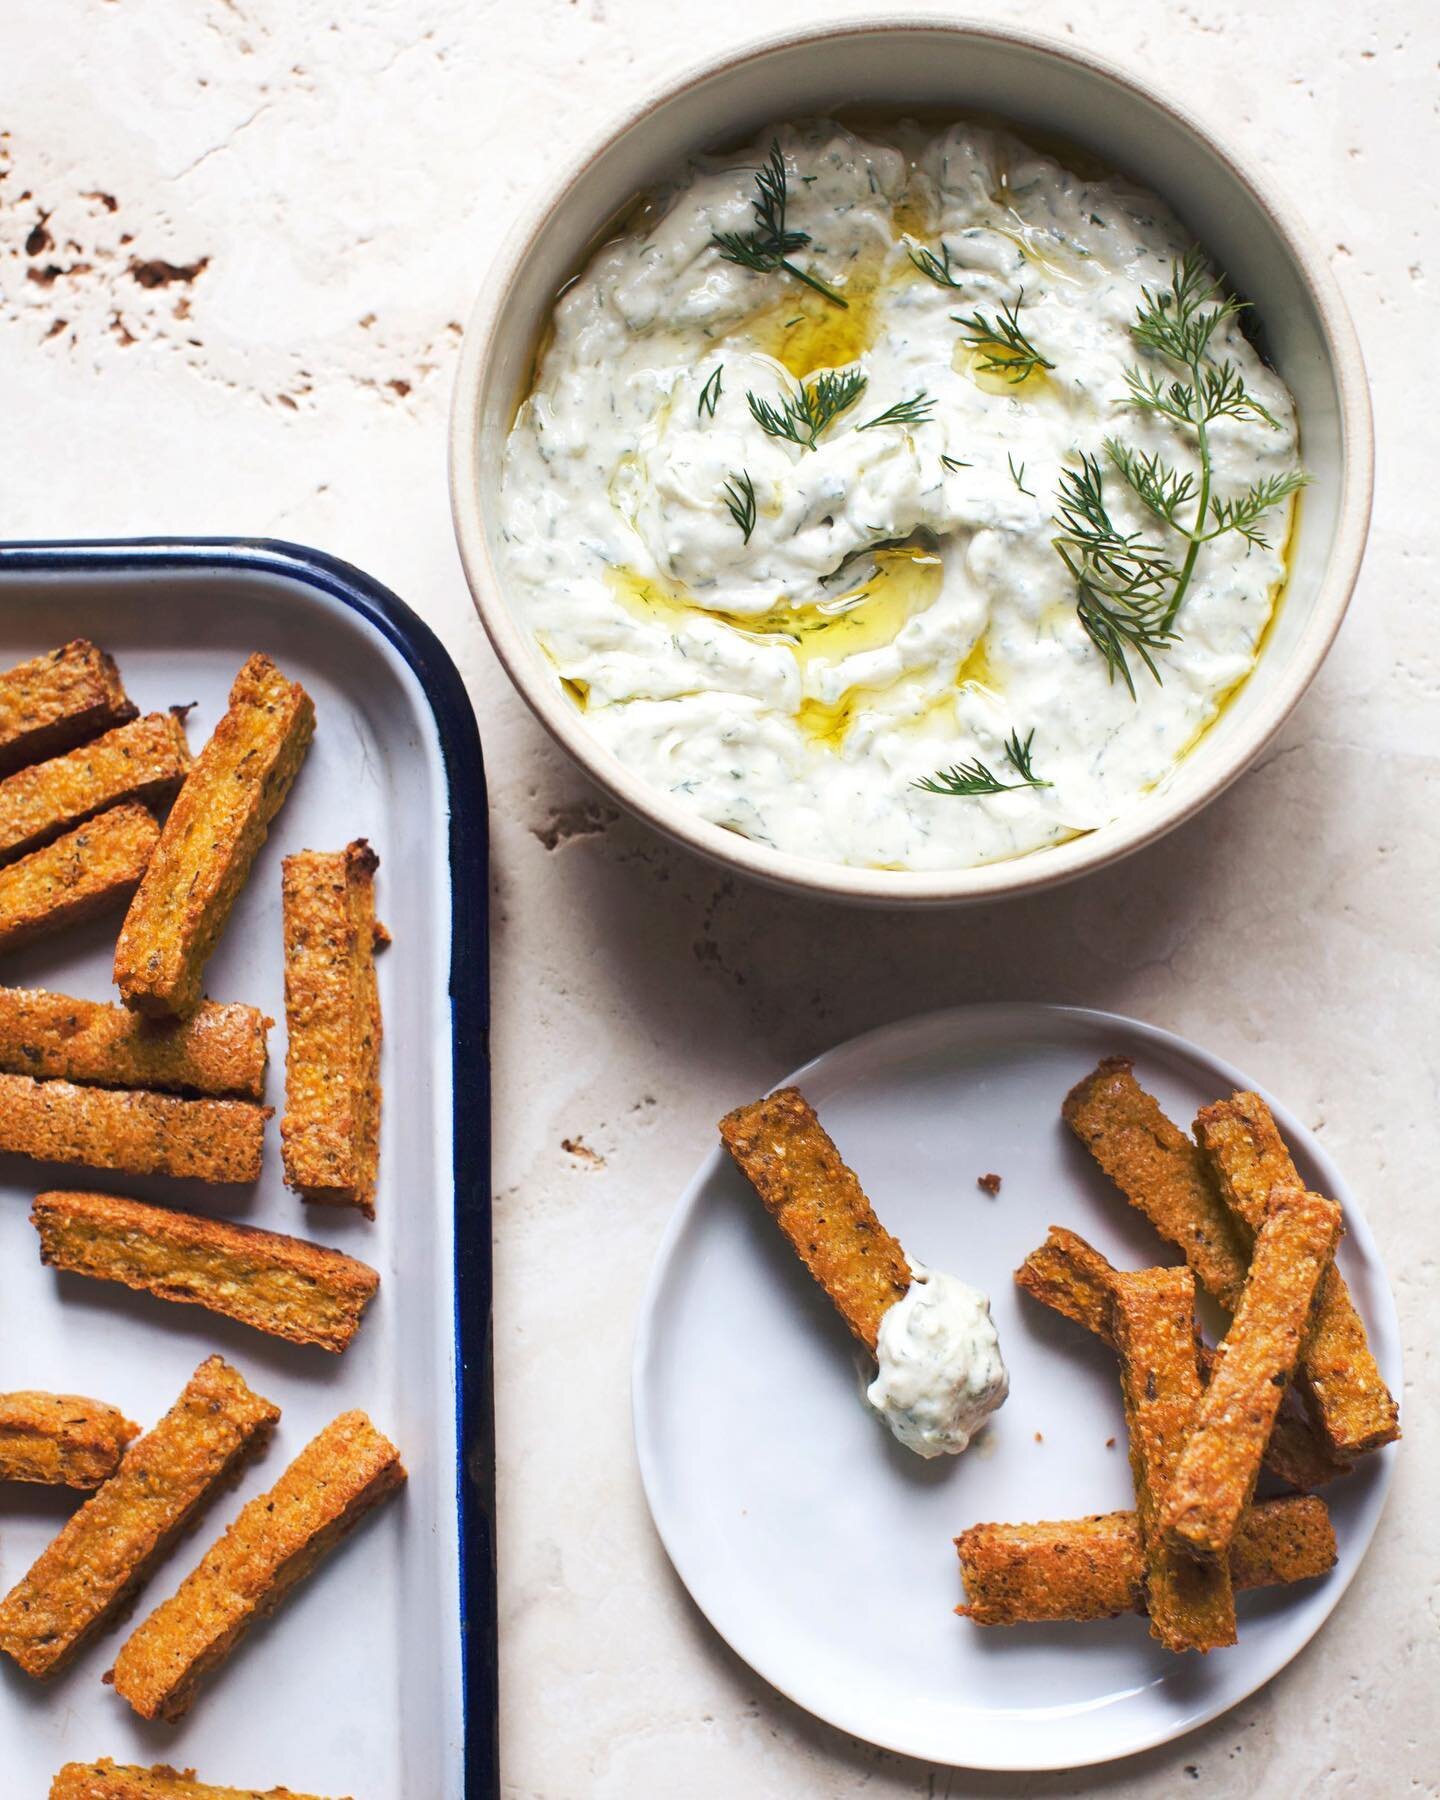 Polenta Fries &amp; Vegan Tzatziki. 

I love a potato chip but I&rsquo;ve really been enjoying experimenting with Zucchini &amp; Polenta fries recently. Both pair perfectly with a light and fresh Tzatziki. 

You can find delicious whole food recipes 